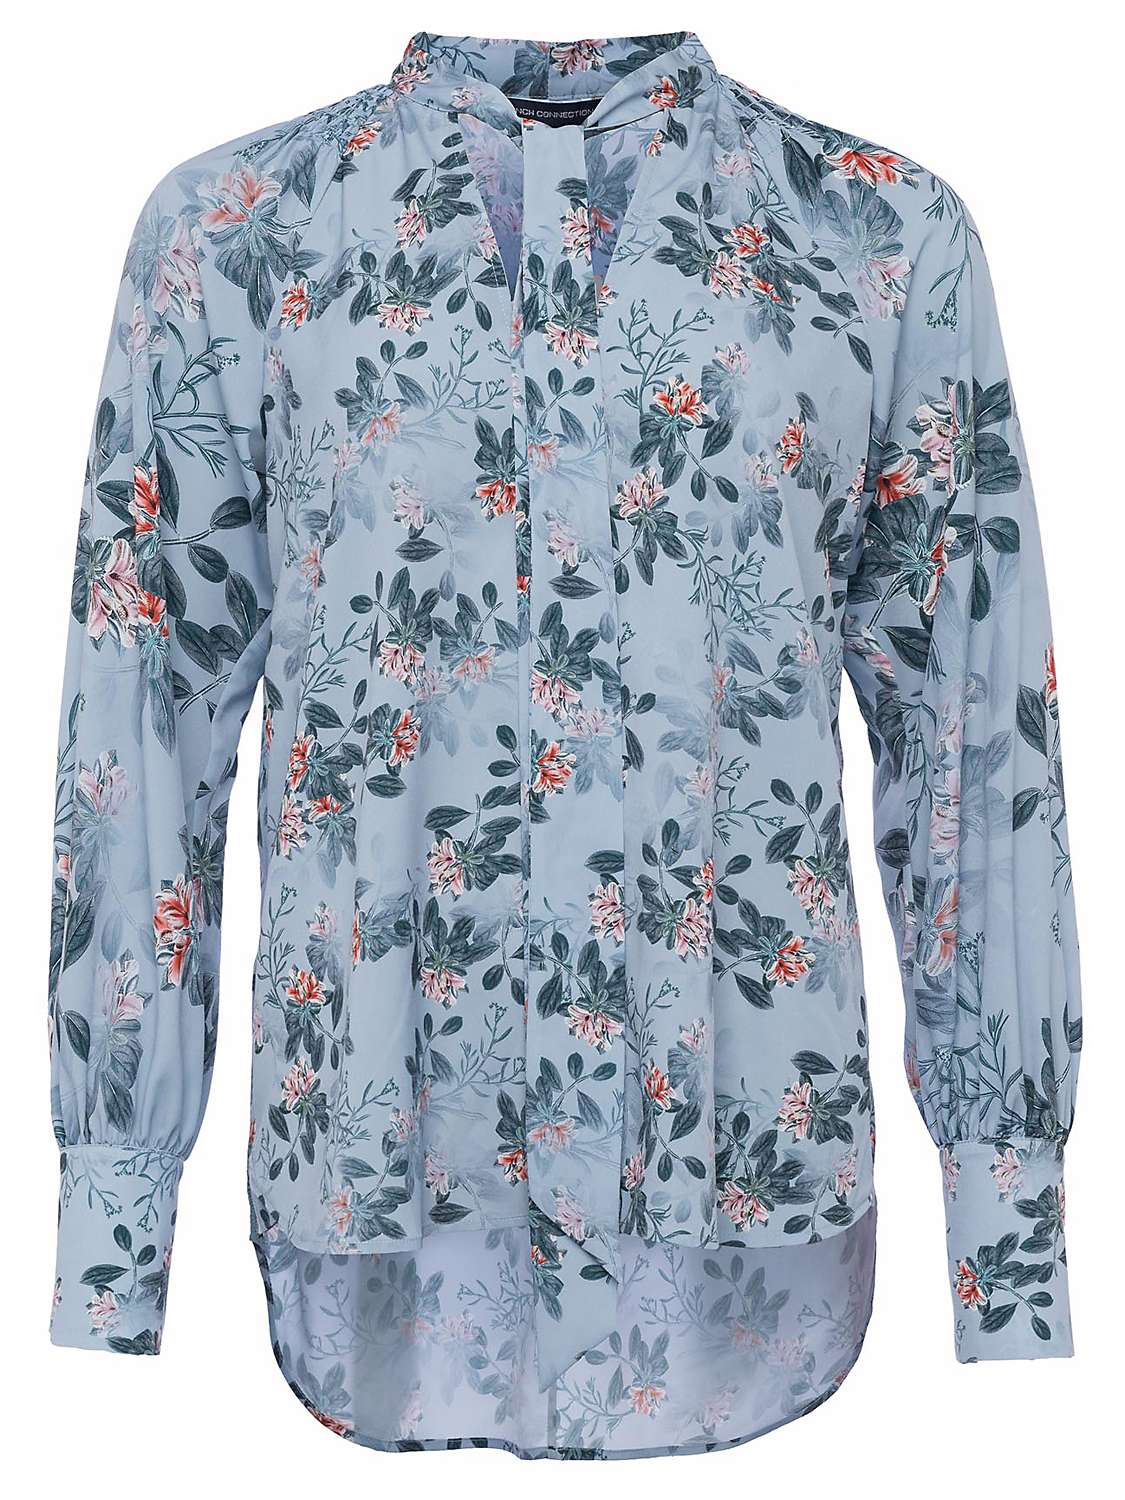 Buy French Connection Kioa Top Online at johnlewis.com